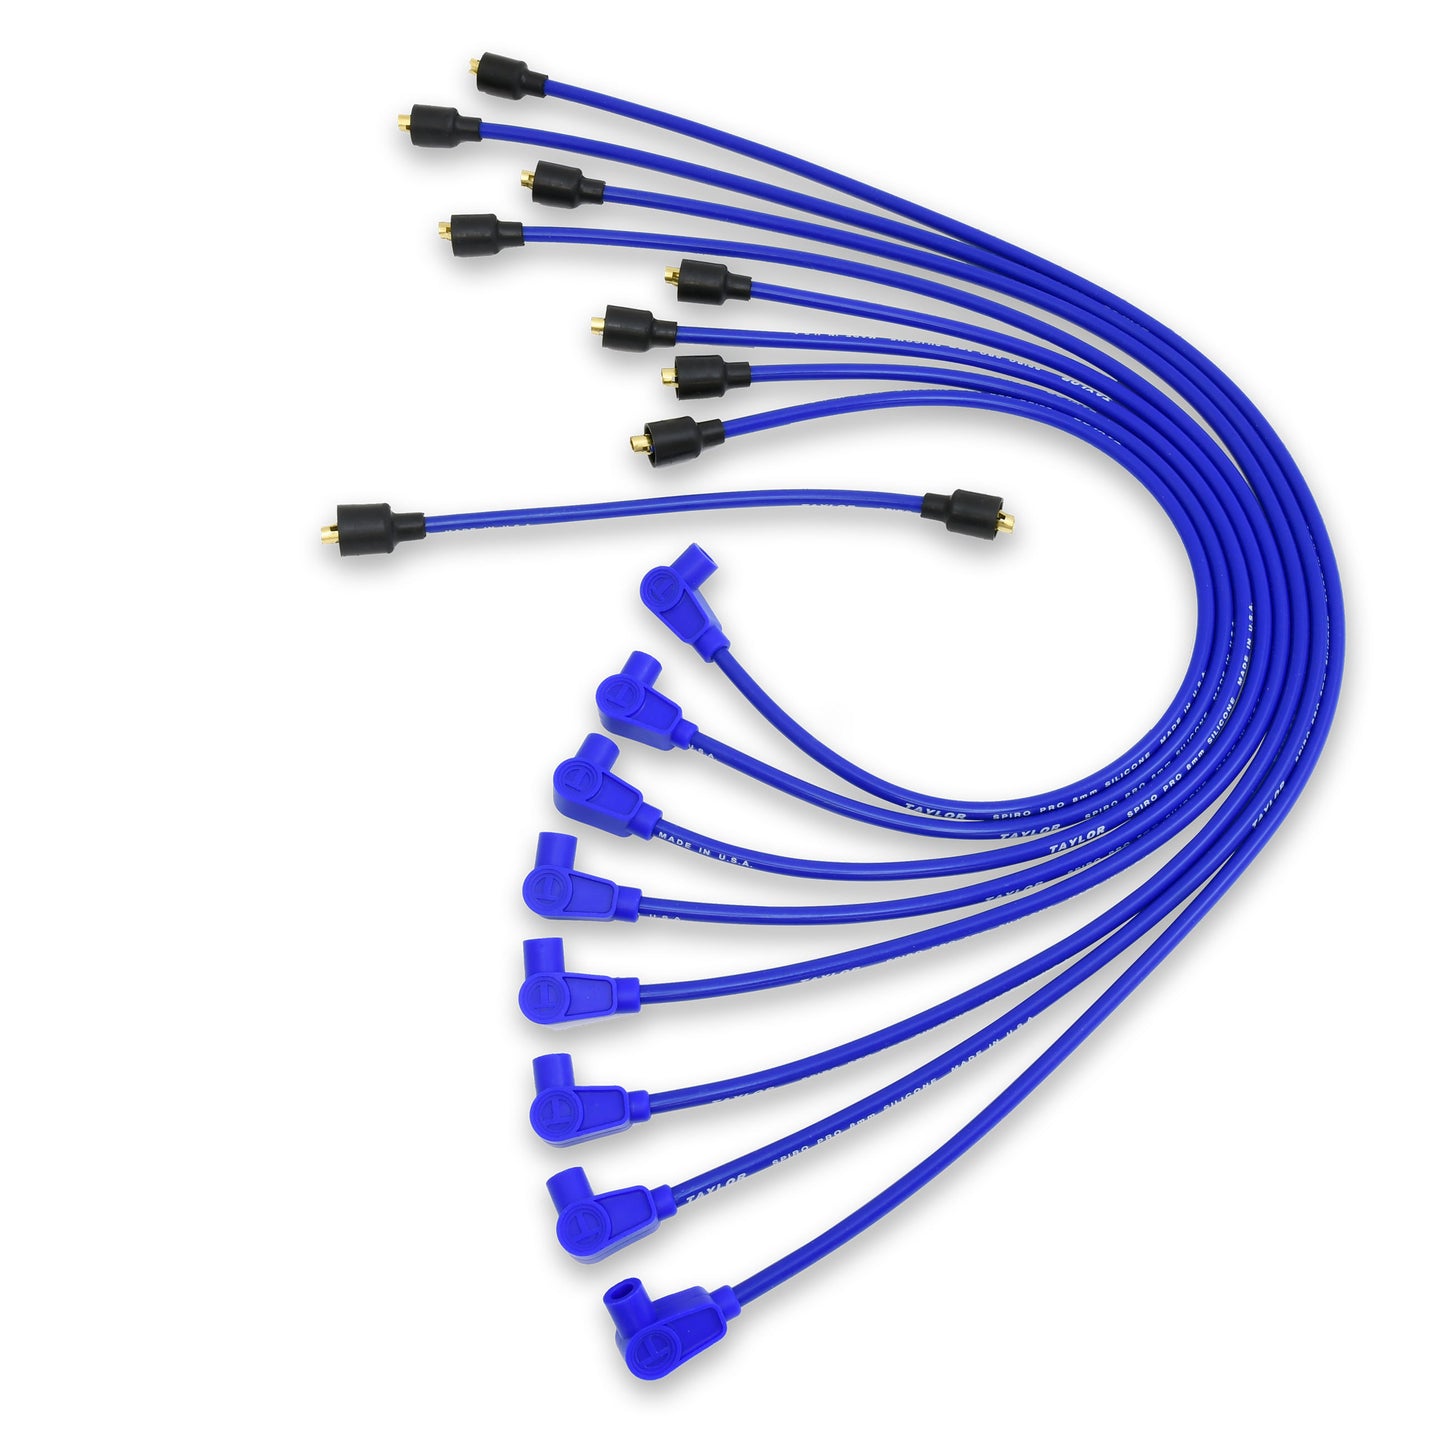 Taylor Cable 79628 10.4mm 409 Spiro Pro Race Fit Spark Plug Wires 90° Blue